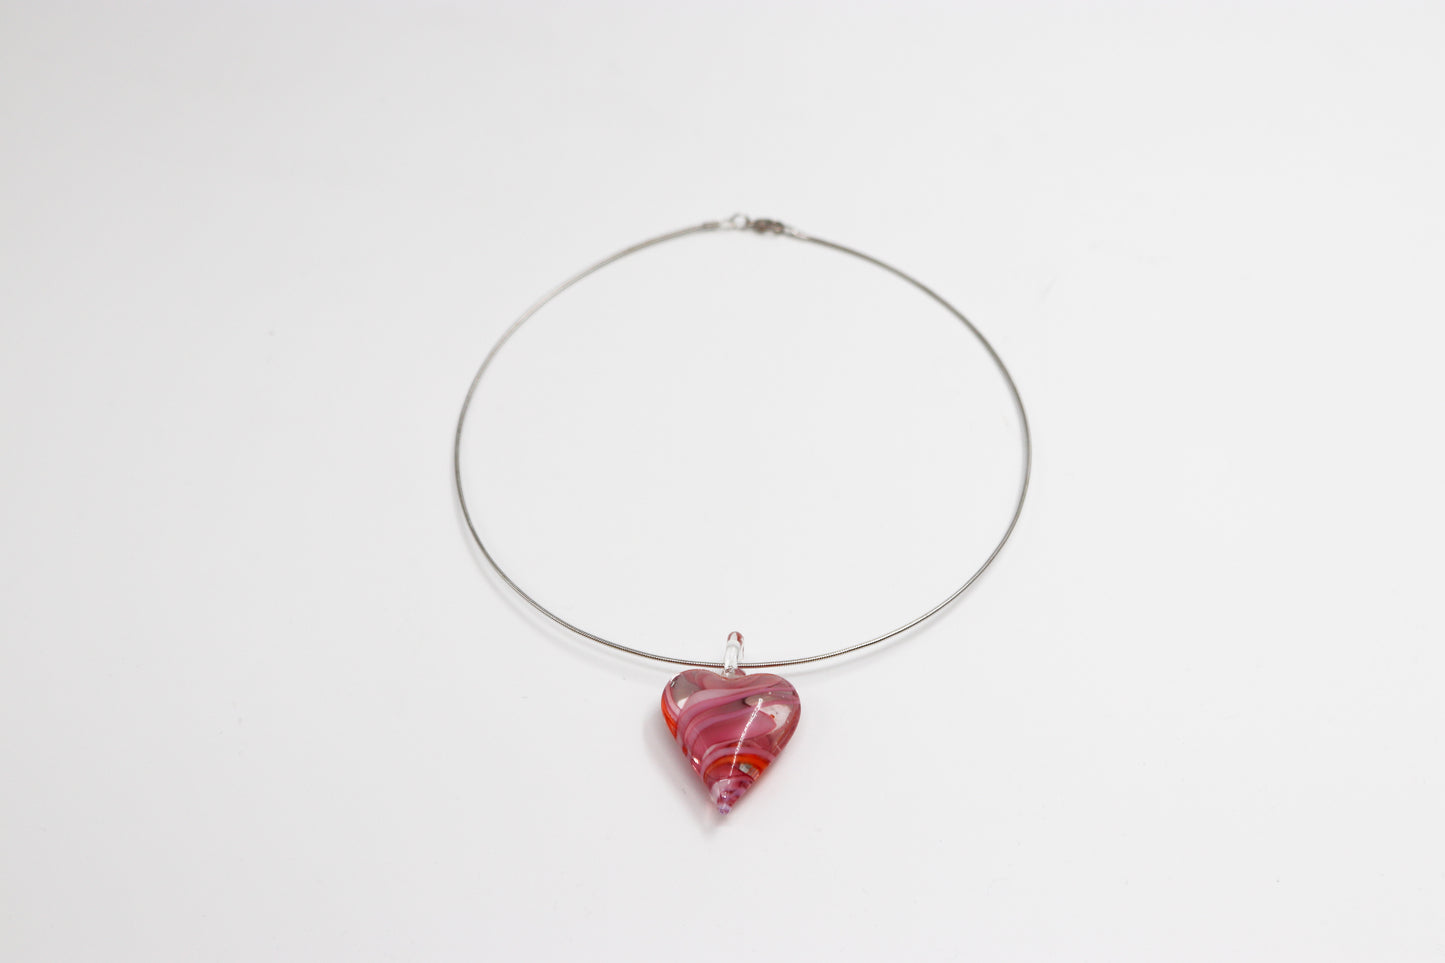 Pink glass heart pendant on a metal wire | Glass Heart Pendant in Pink | Baobei Label